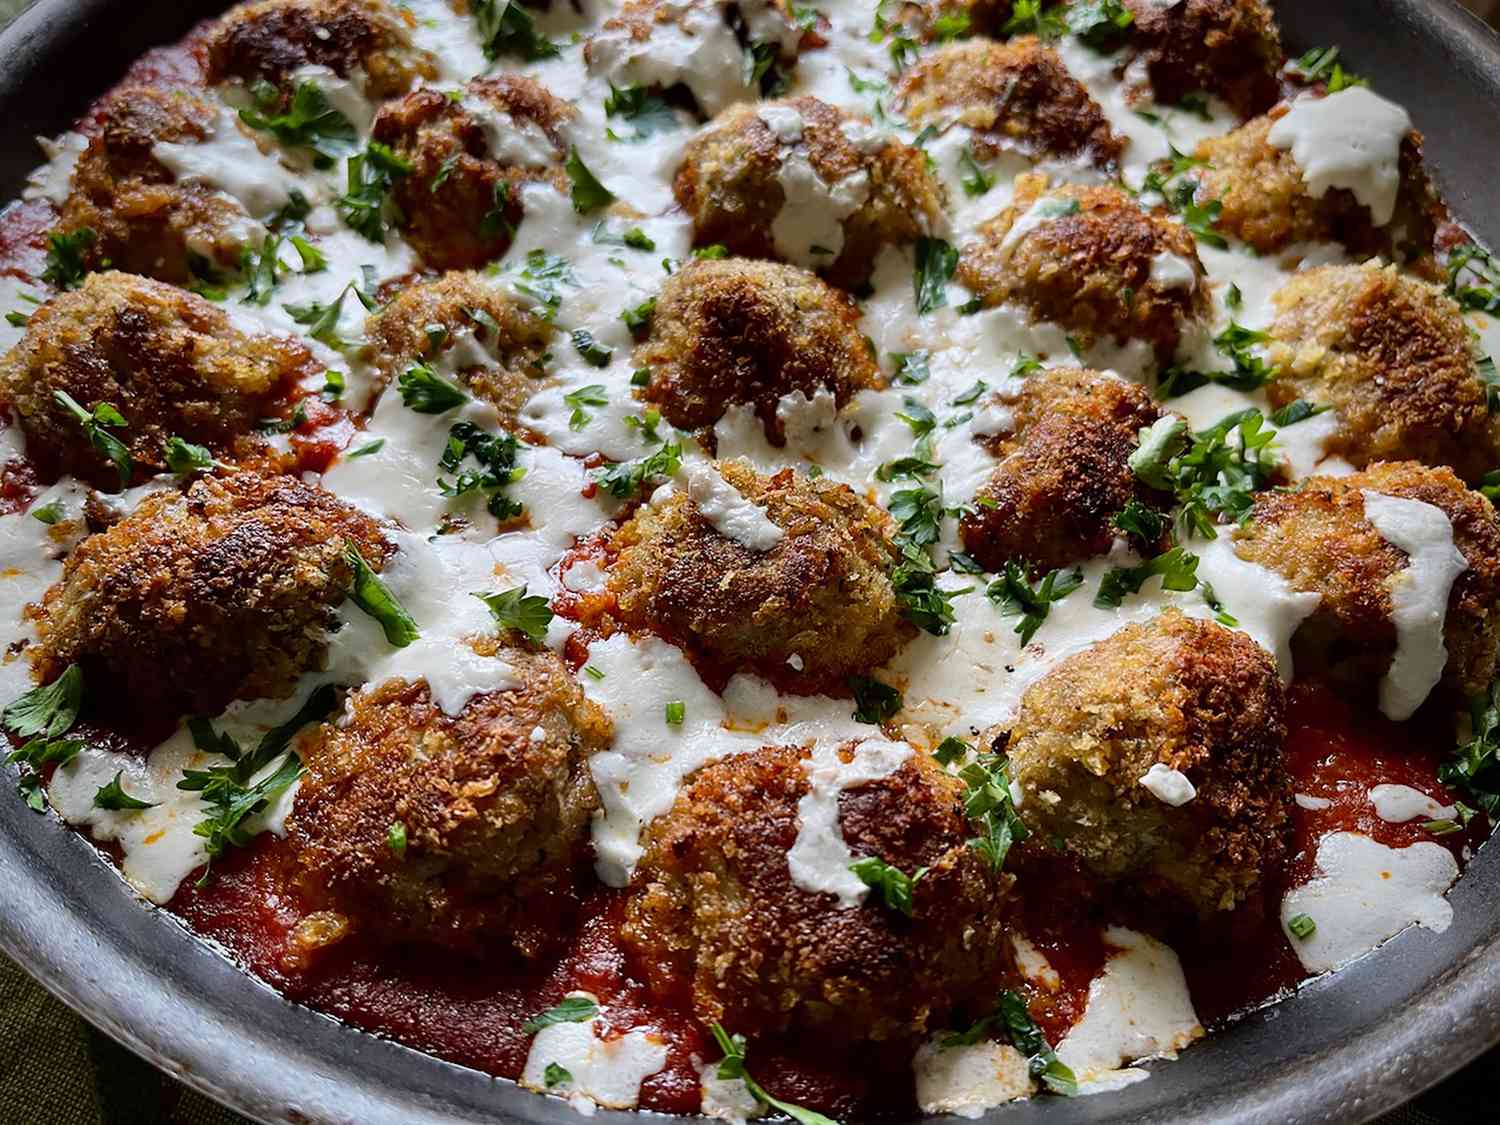 Skillet with meatballs and melted mozzarella in marinara sauce